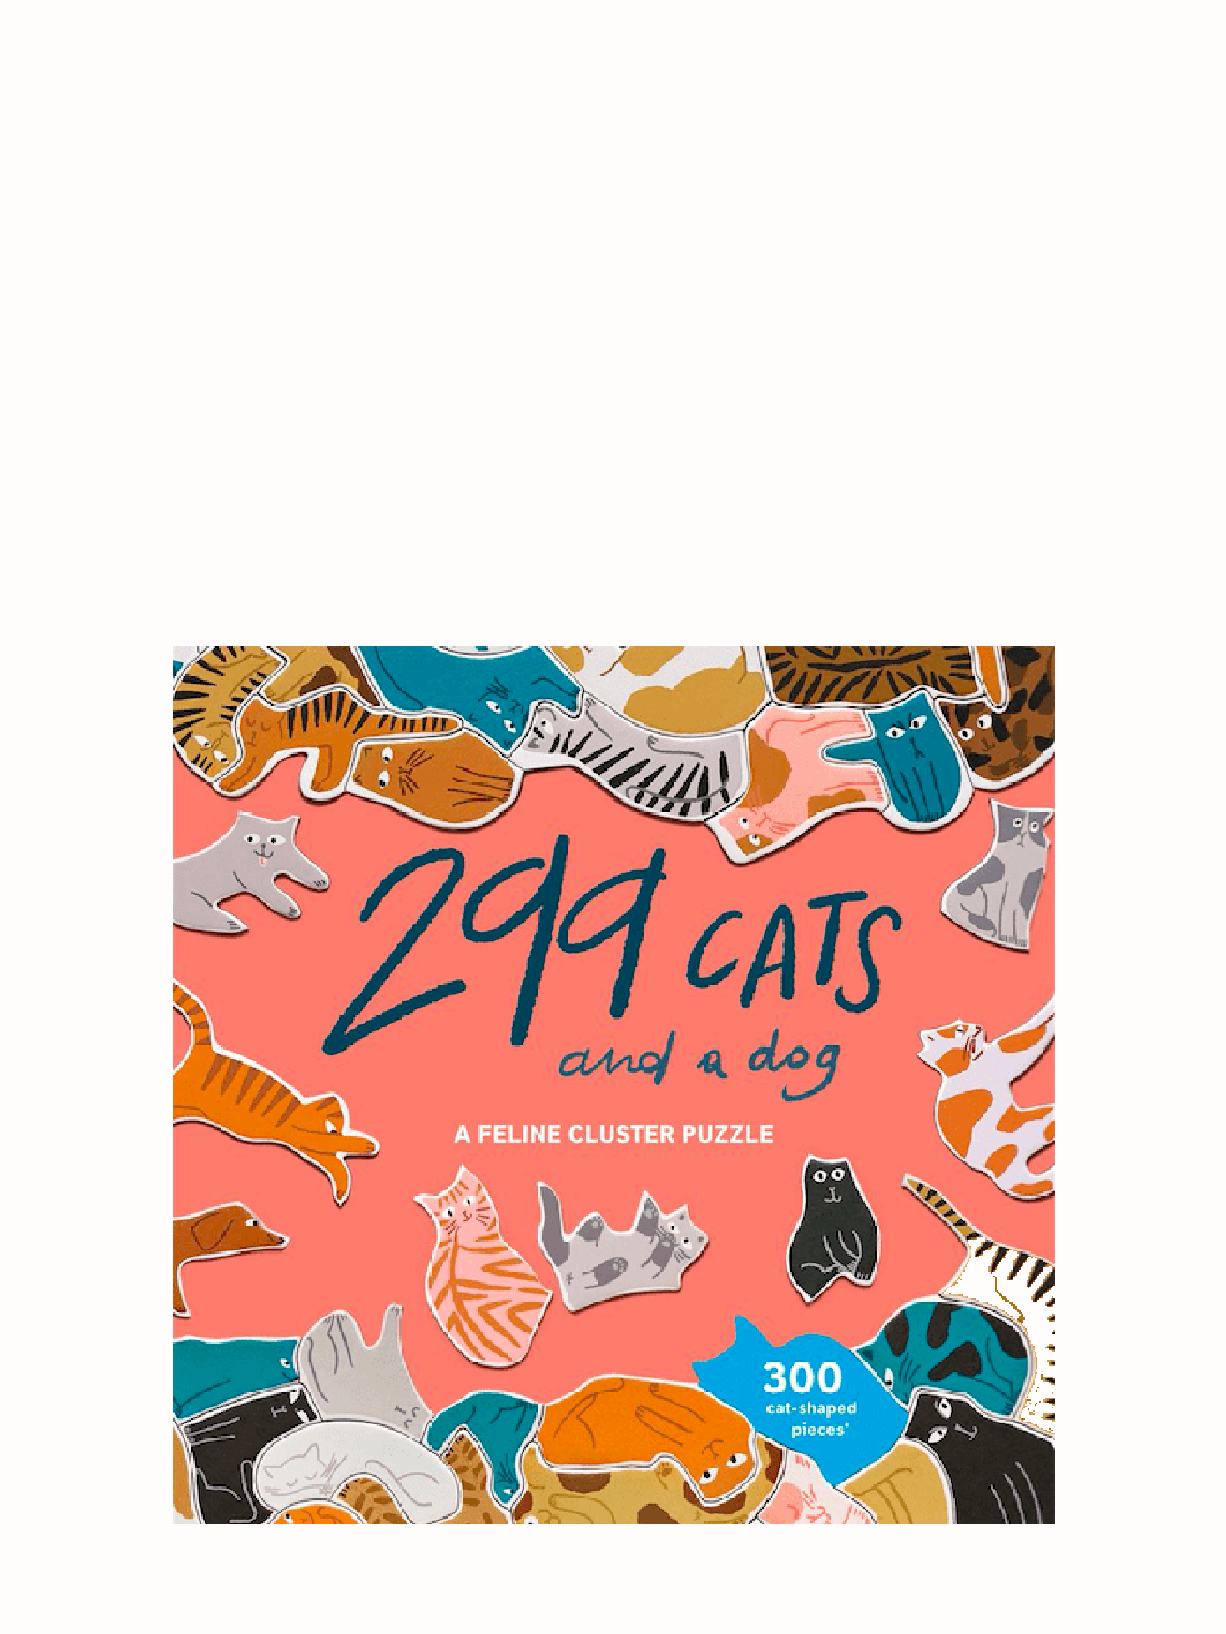 299 Cats (and a dog). A feline cluster puzzle.